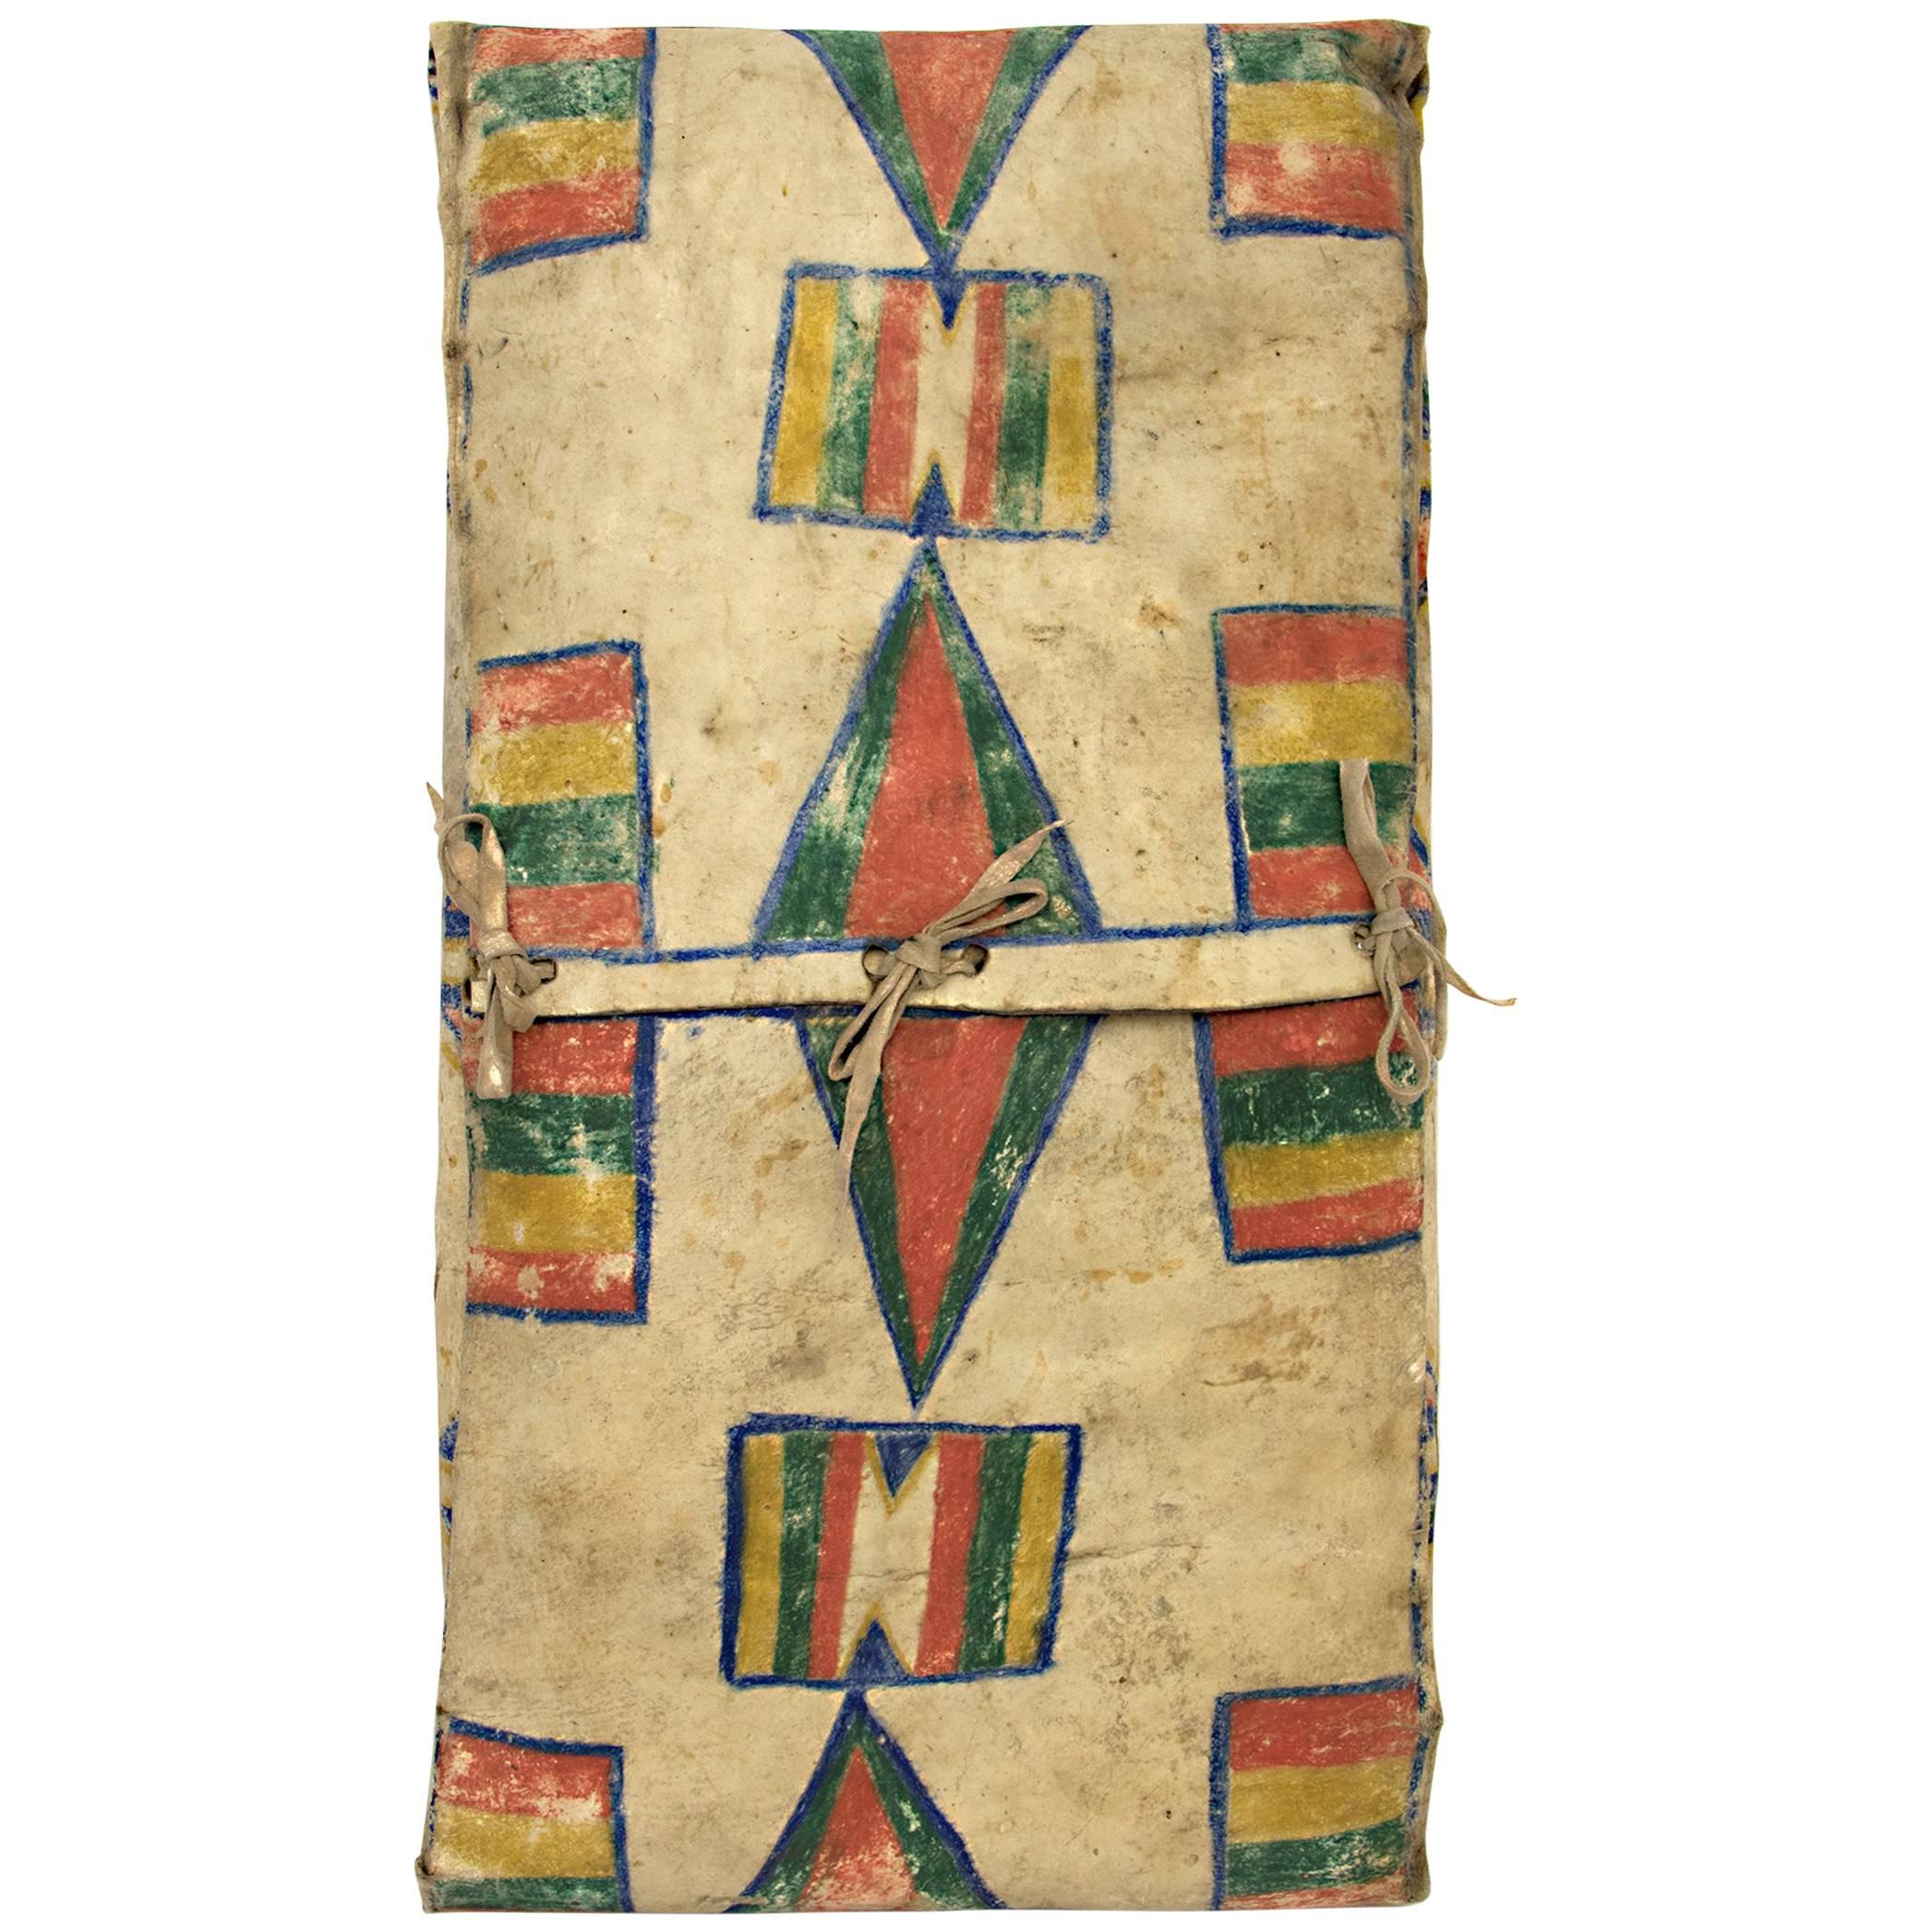 Native American Parfleche Envelope with Abstract Painting, 19th Century, Plateau